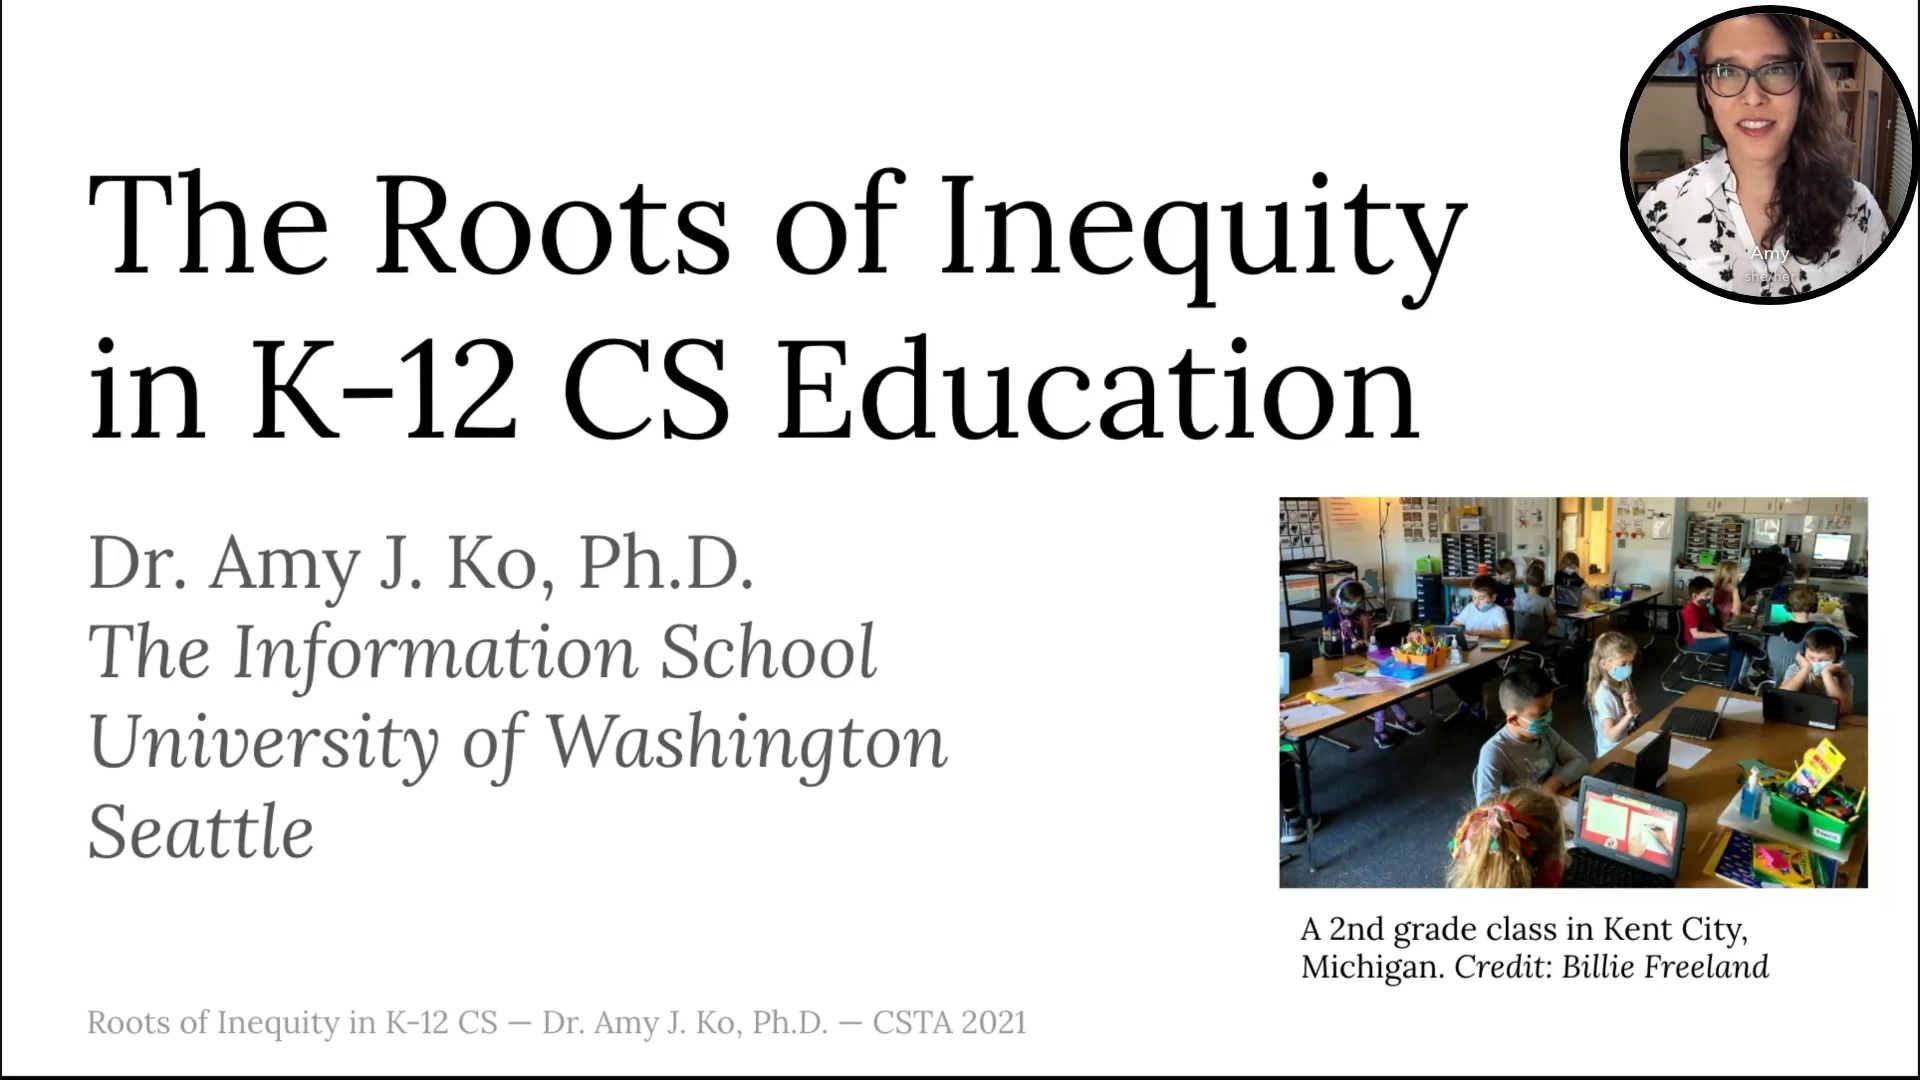 The title slide, which says 'The Roots of Inequity in K-12 CS Education' and shows an elementary CS classroom.